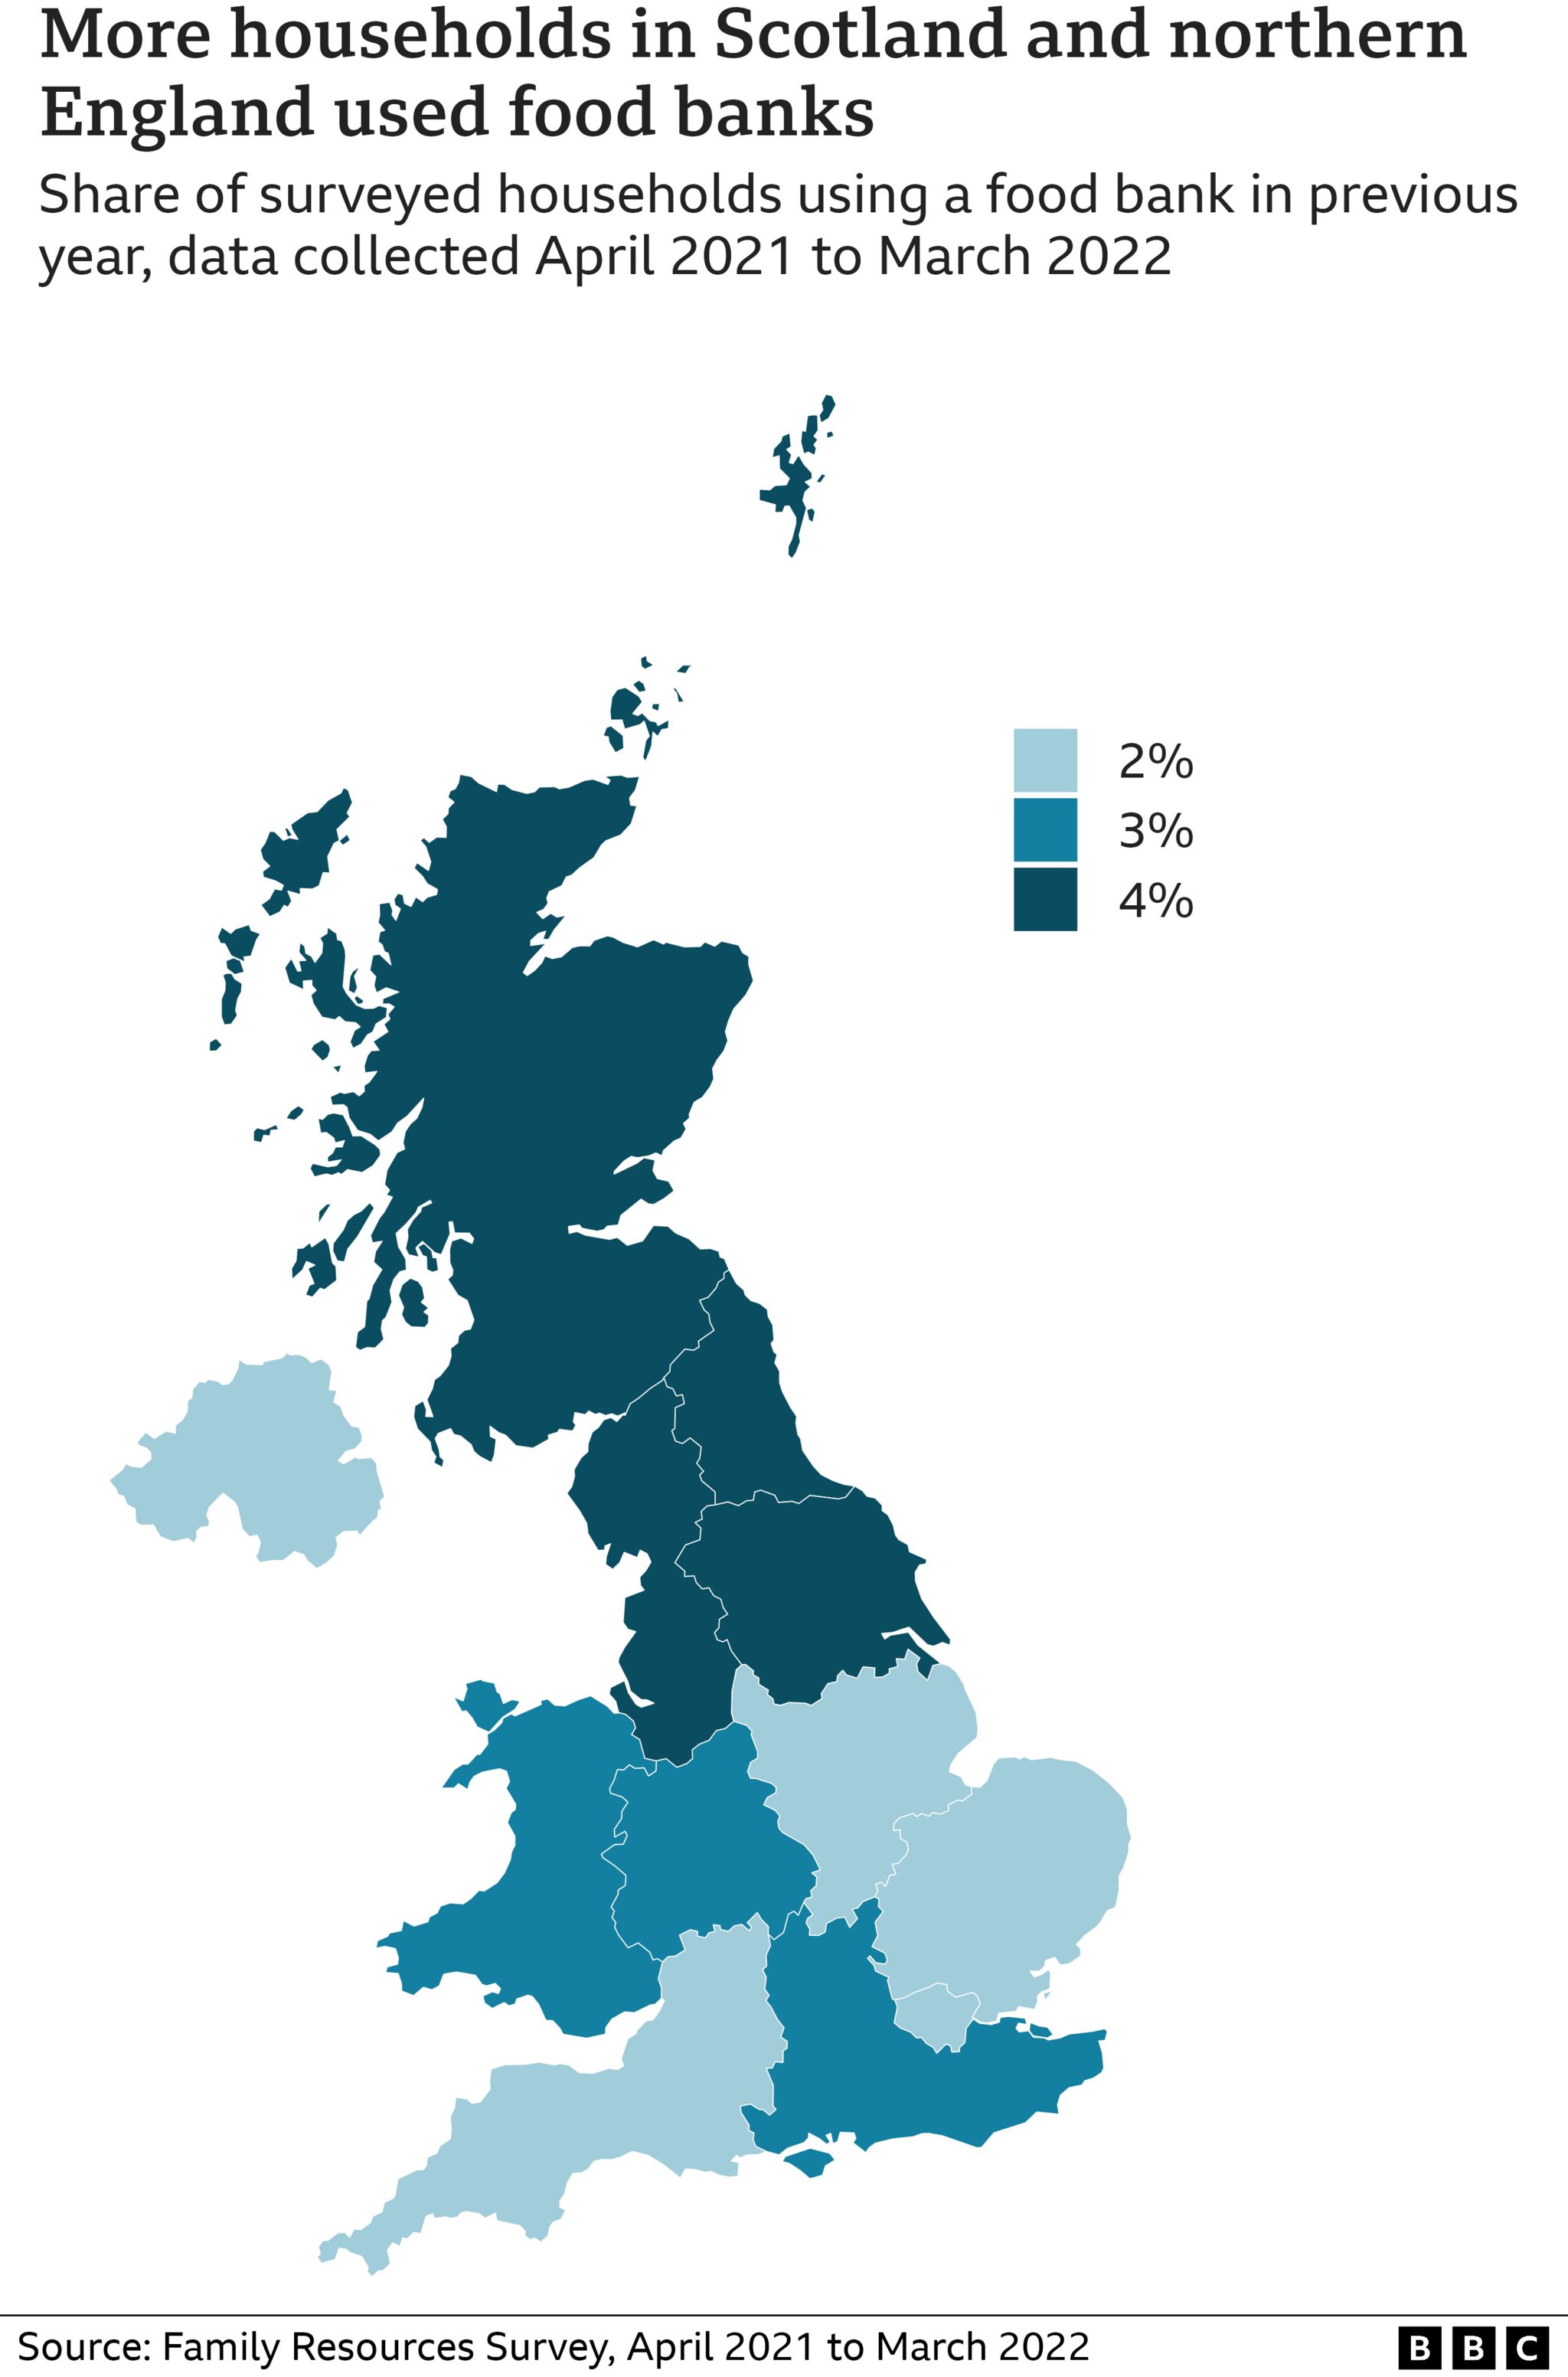 Graphic showing food bank usage by area of the UK